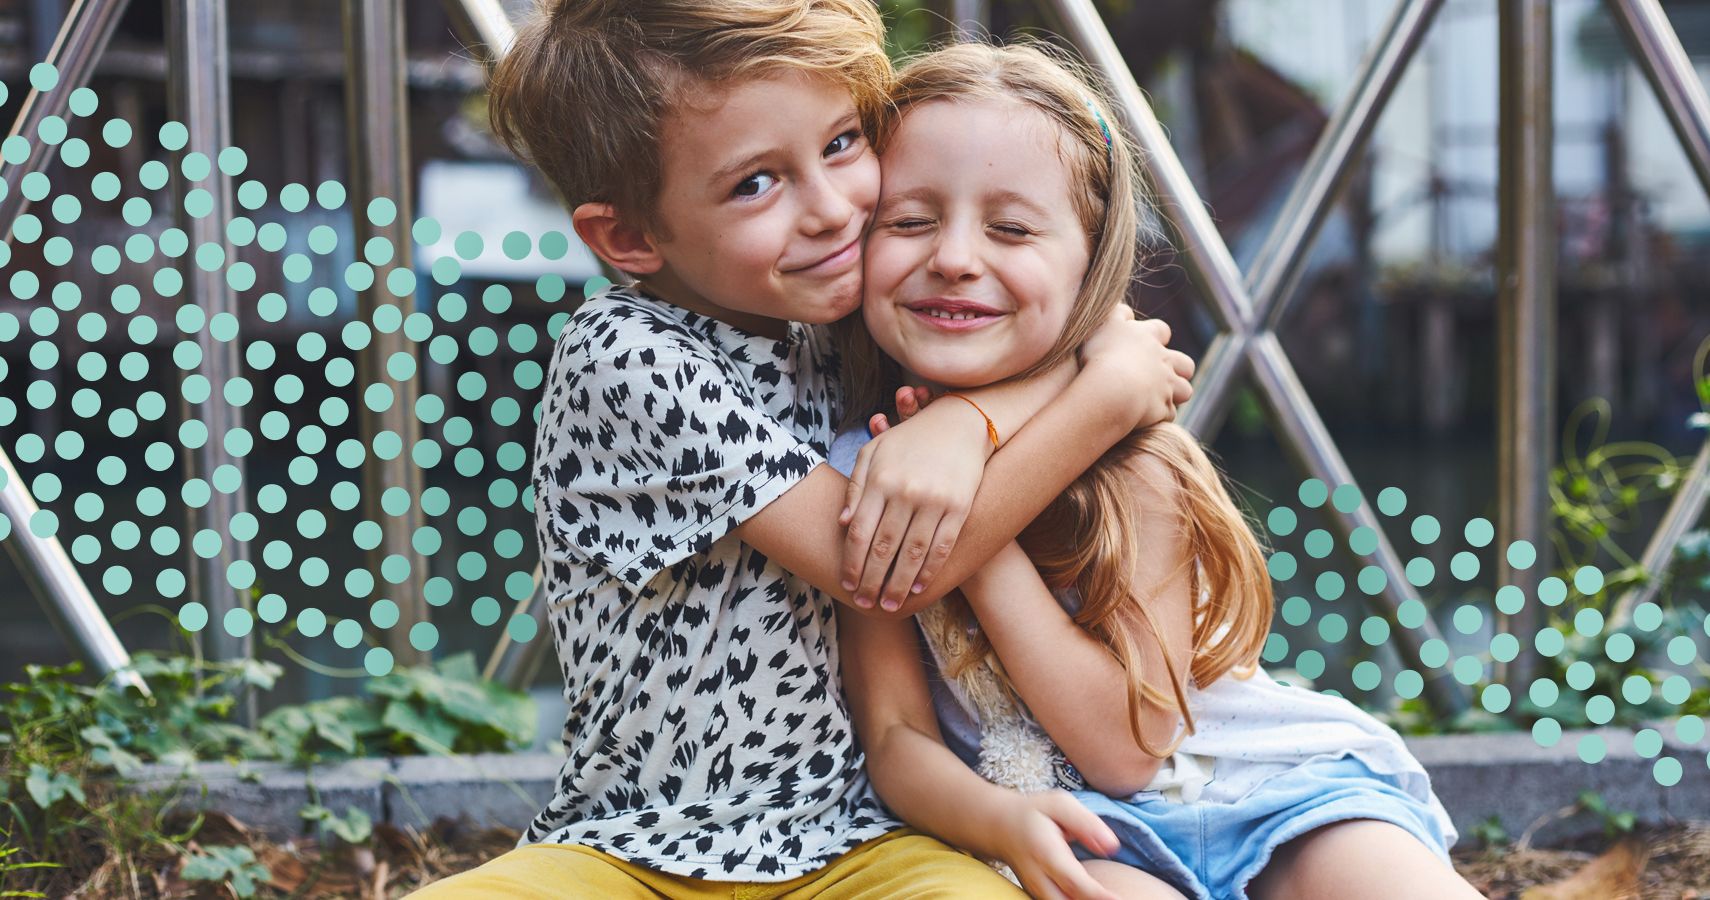 Does A Sibling’s Gender Influence A Child's Personality?